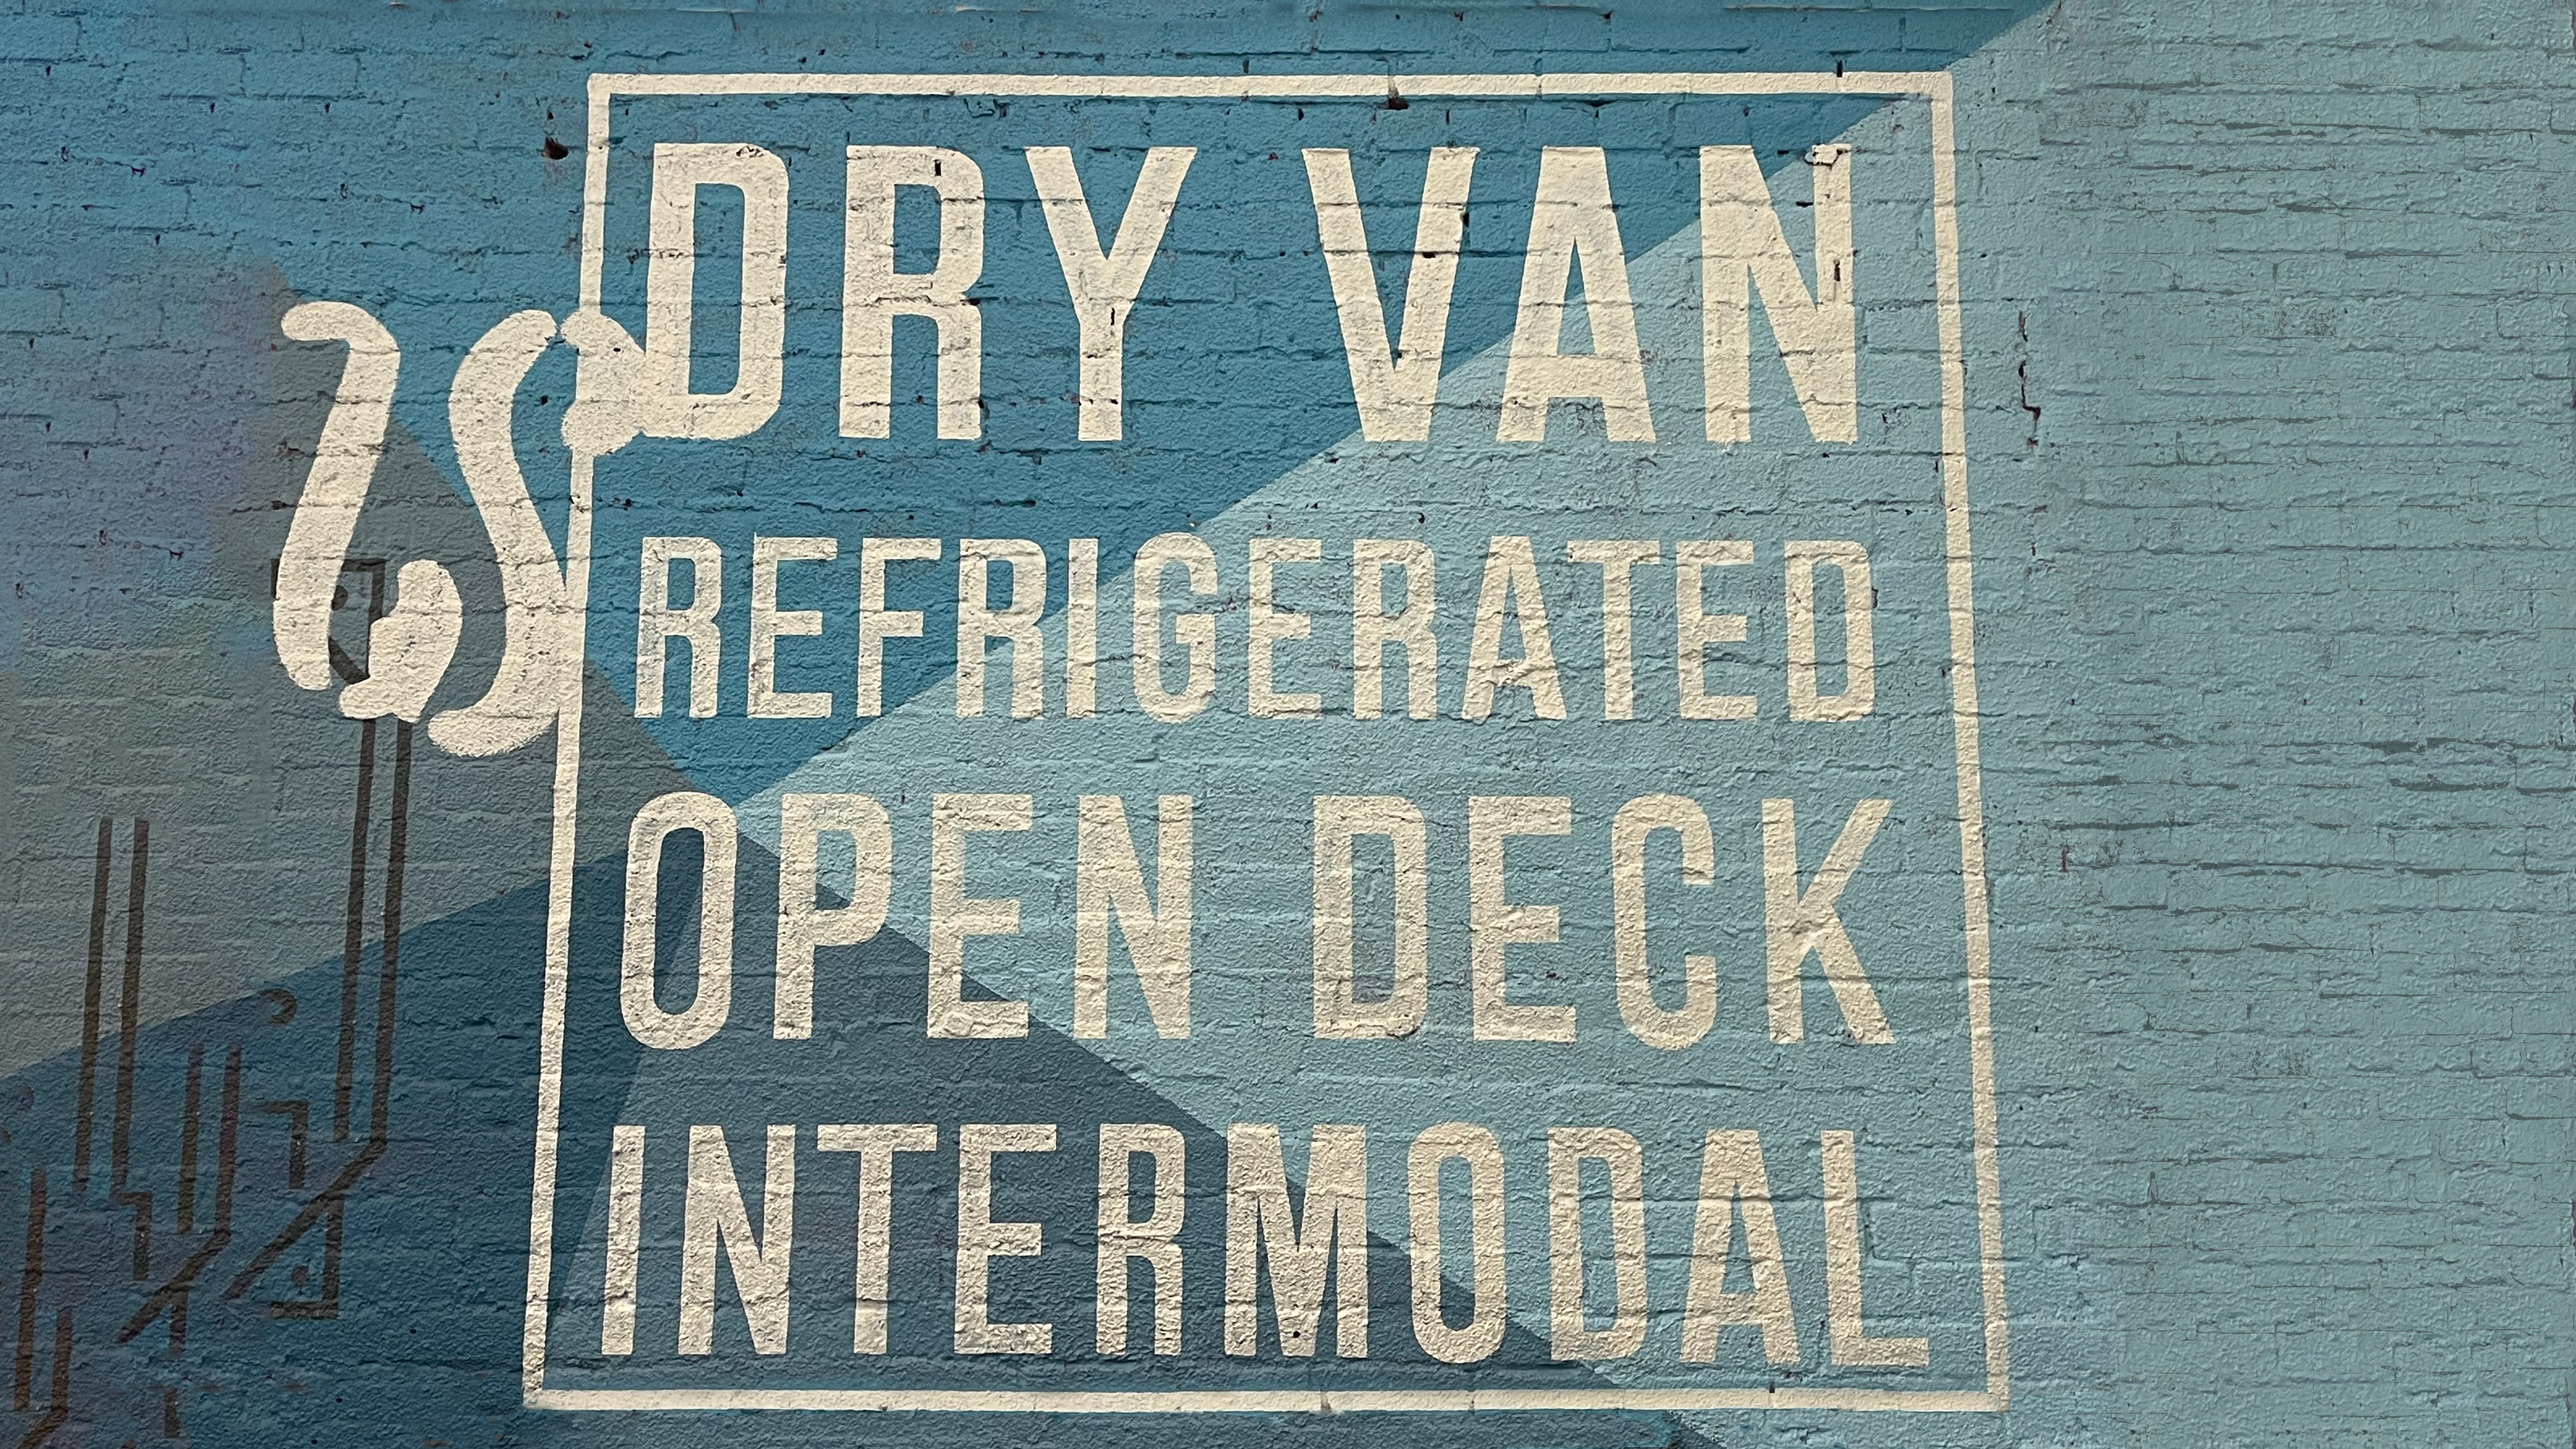 a blue wall mural on brick that mentions open deck.